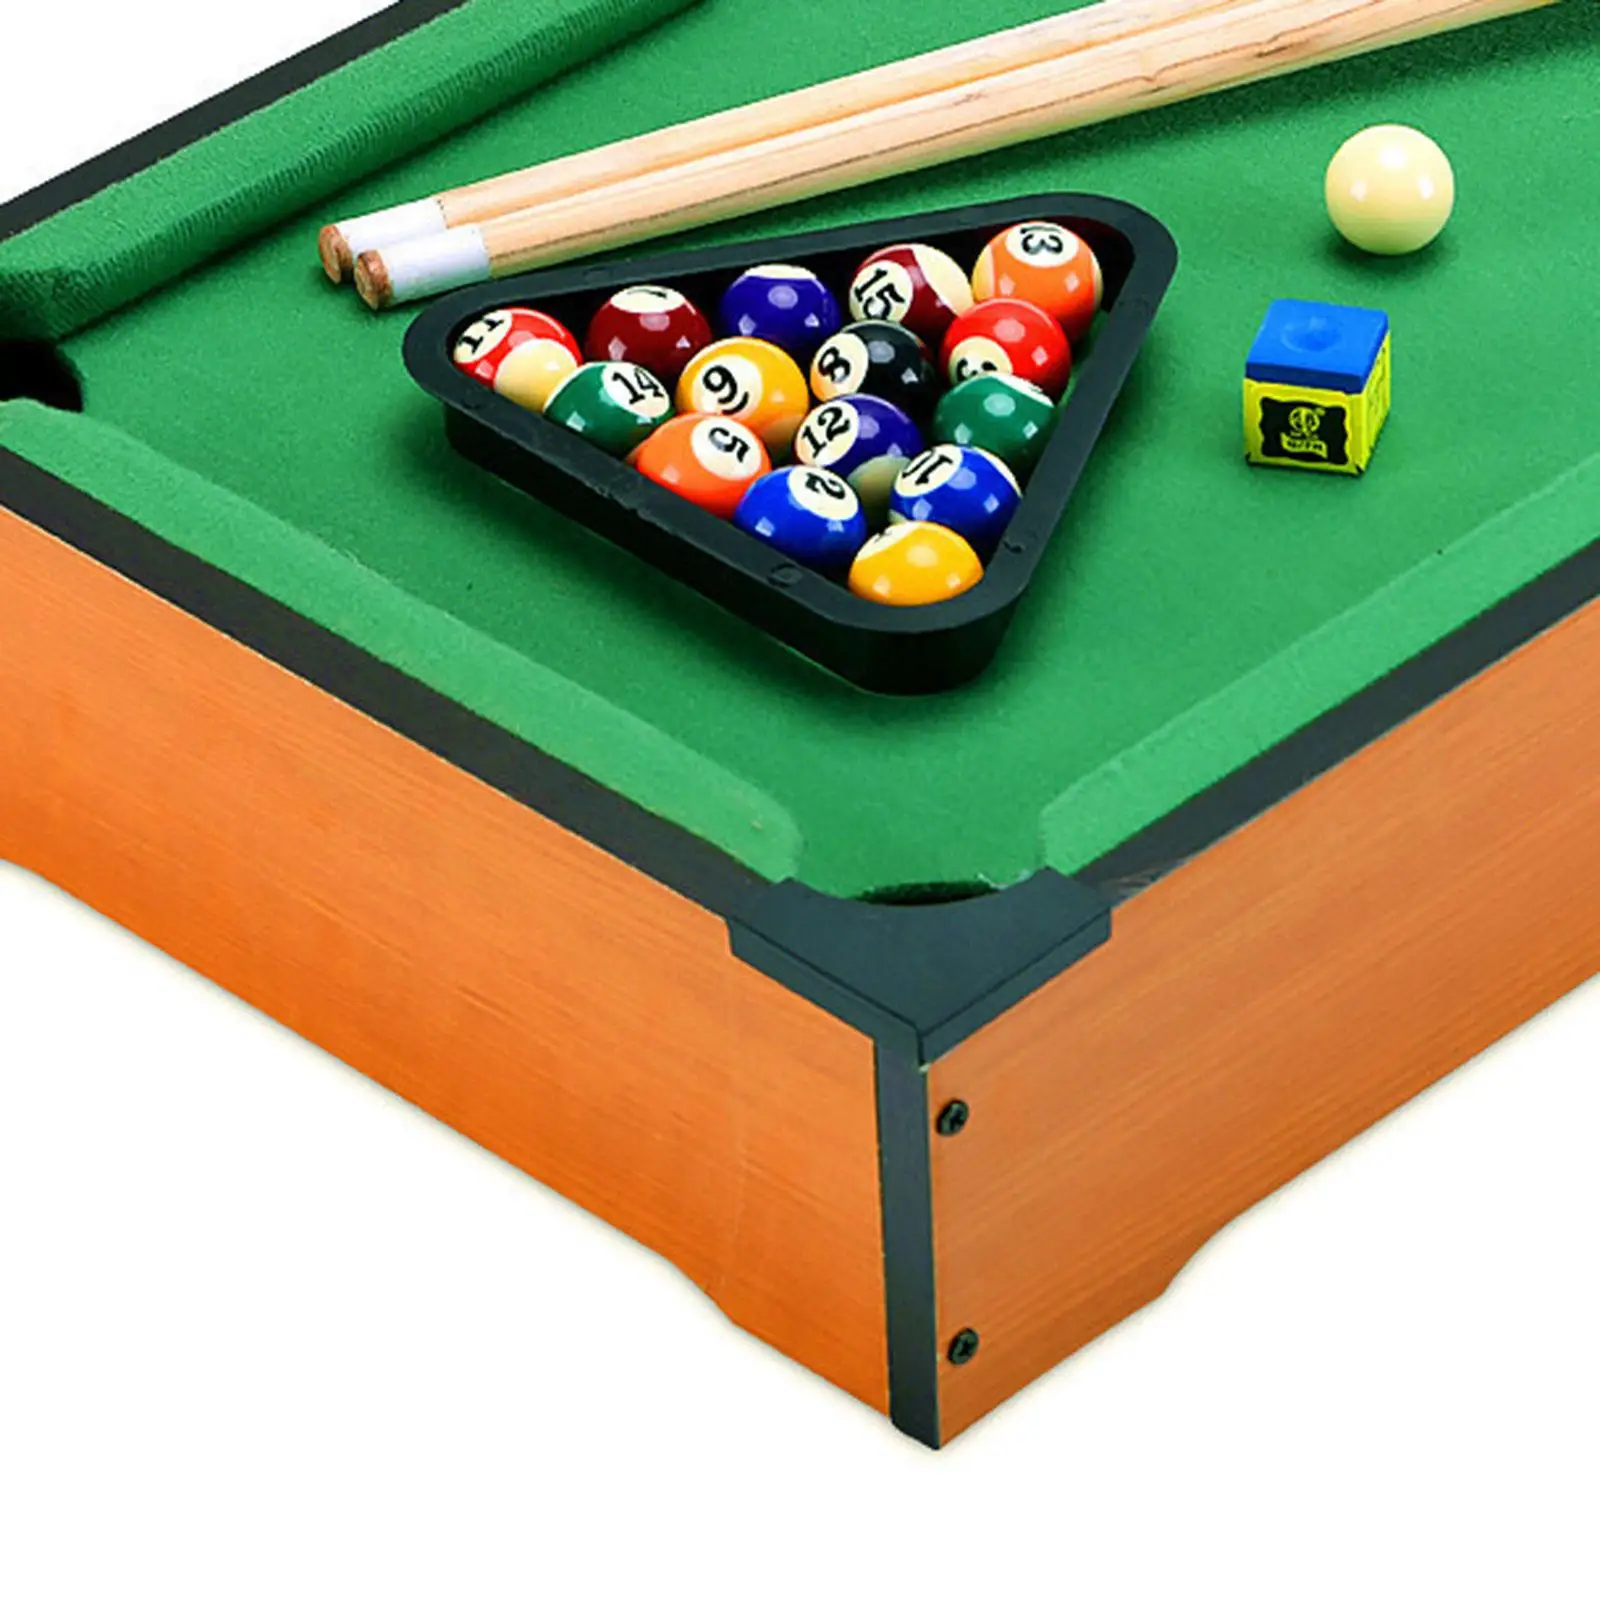 Mini Tabletop Pool Set Balls Easily Set up Playset Motor Skills Billiards Toy Wooden Snooker for Party Desk Home Game Room Gift